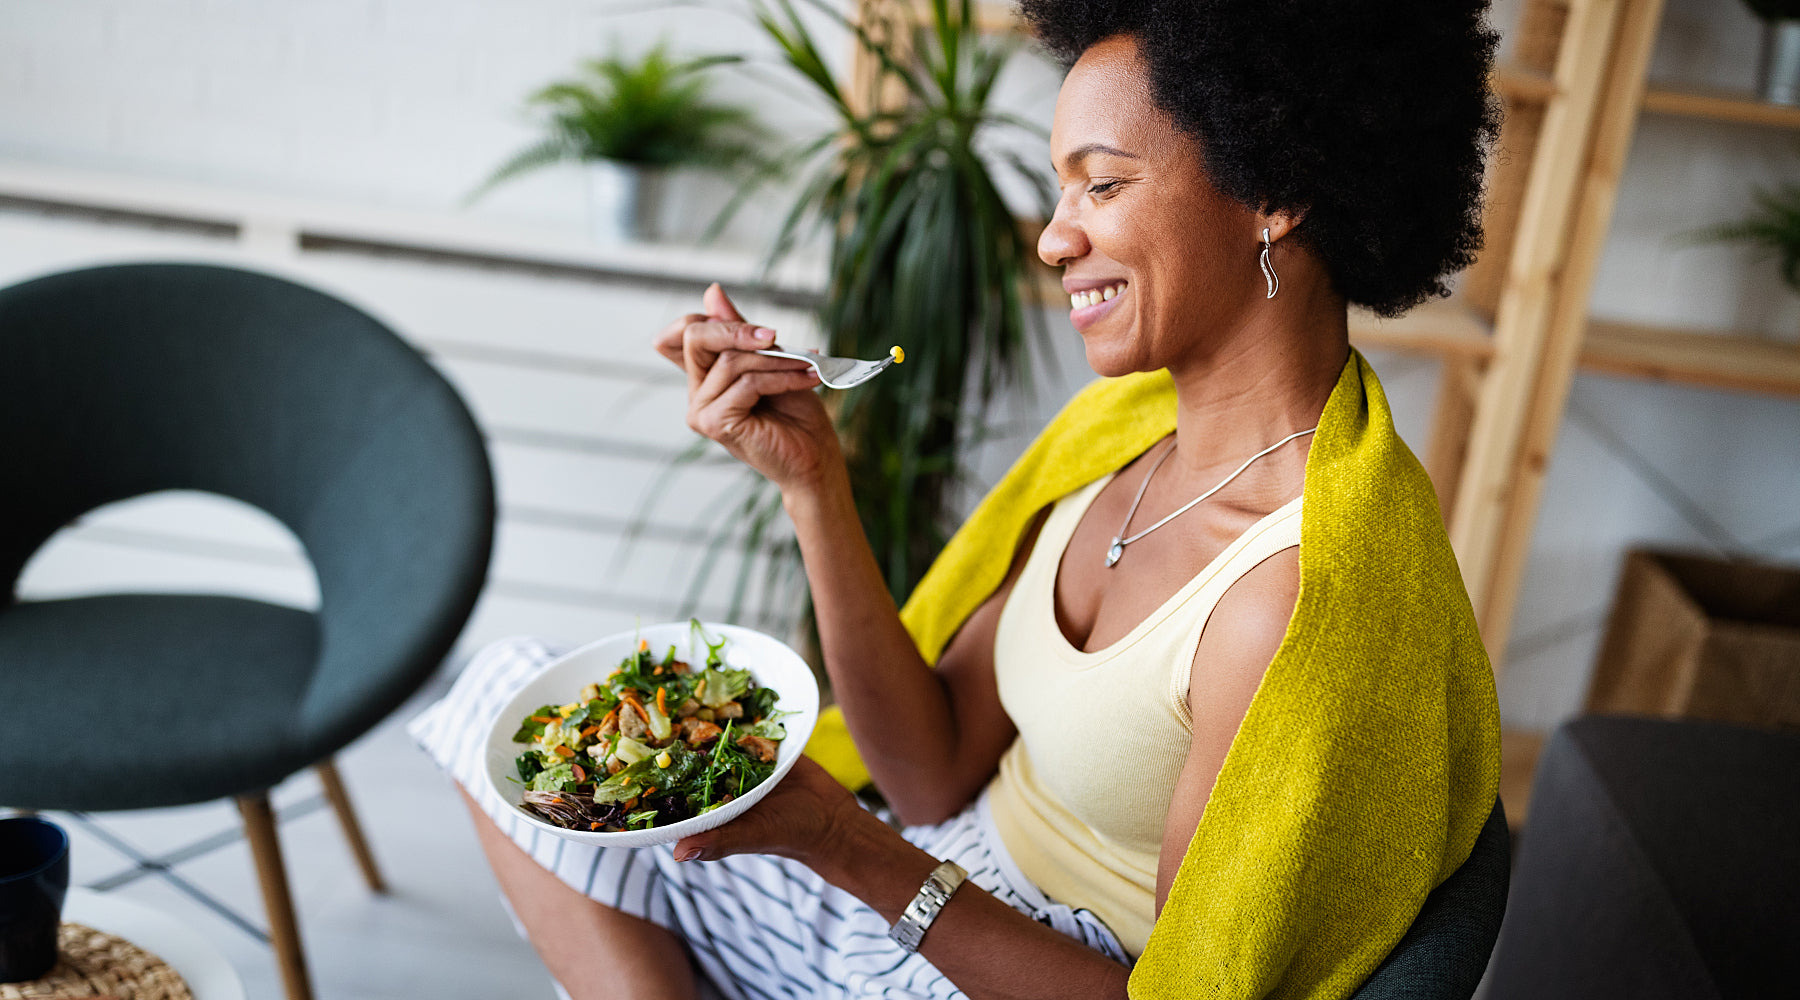 Person eating a salad in a bowl to regulate blood sugar.